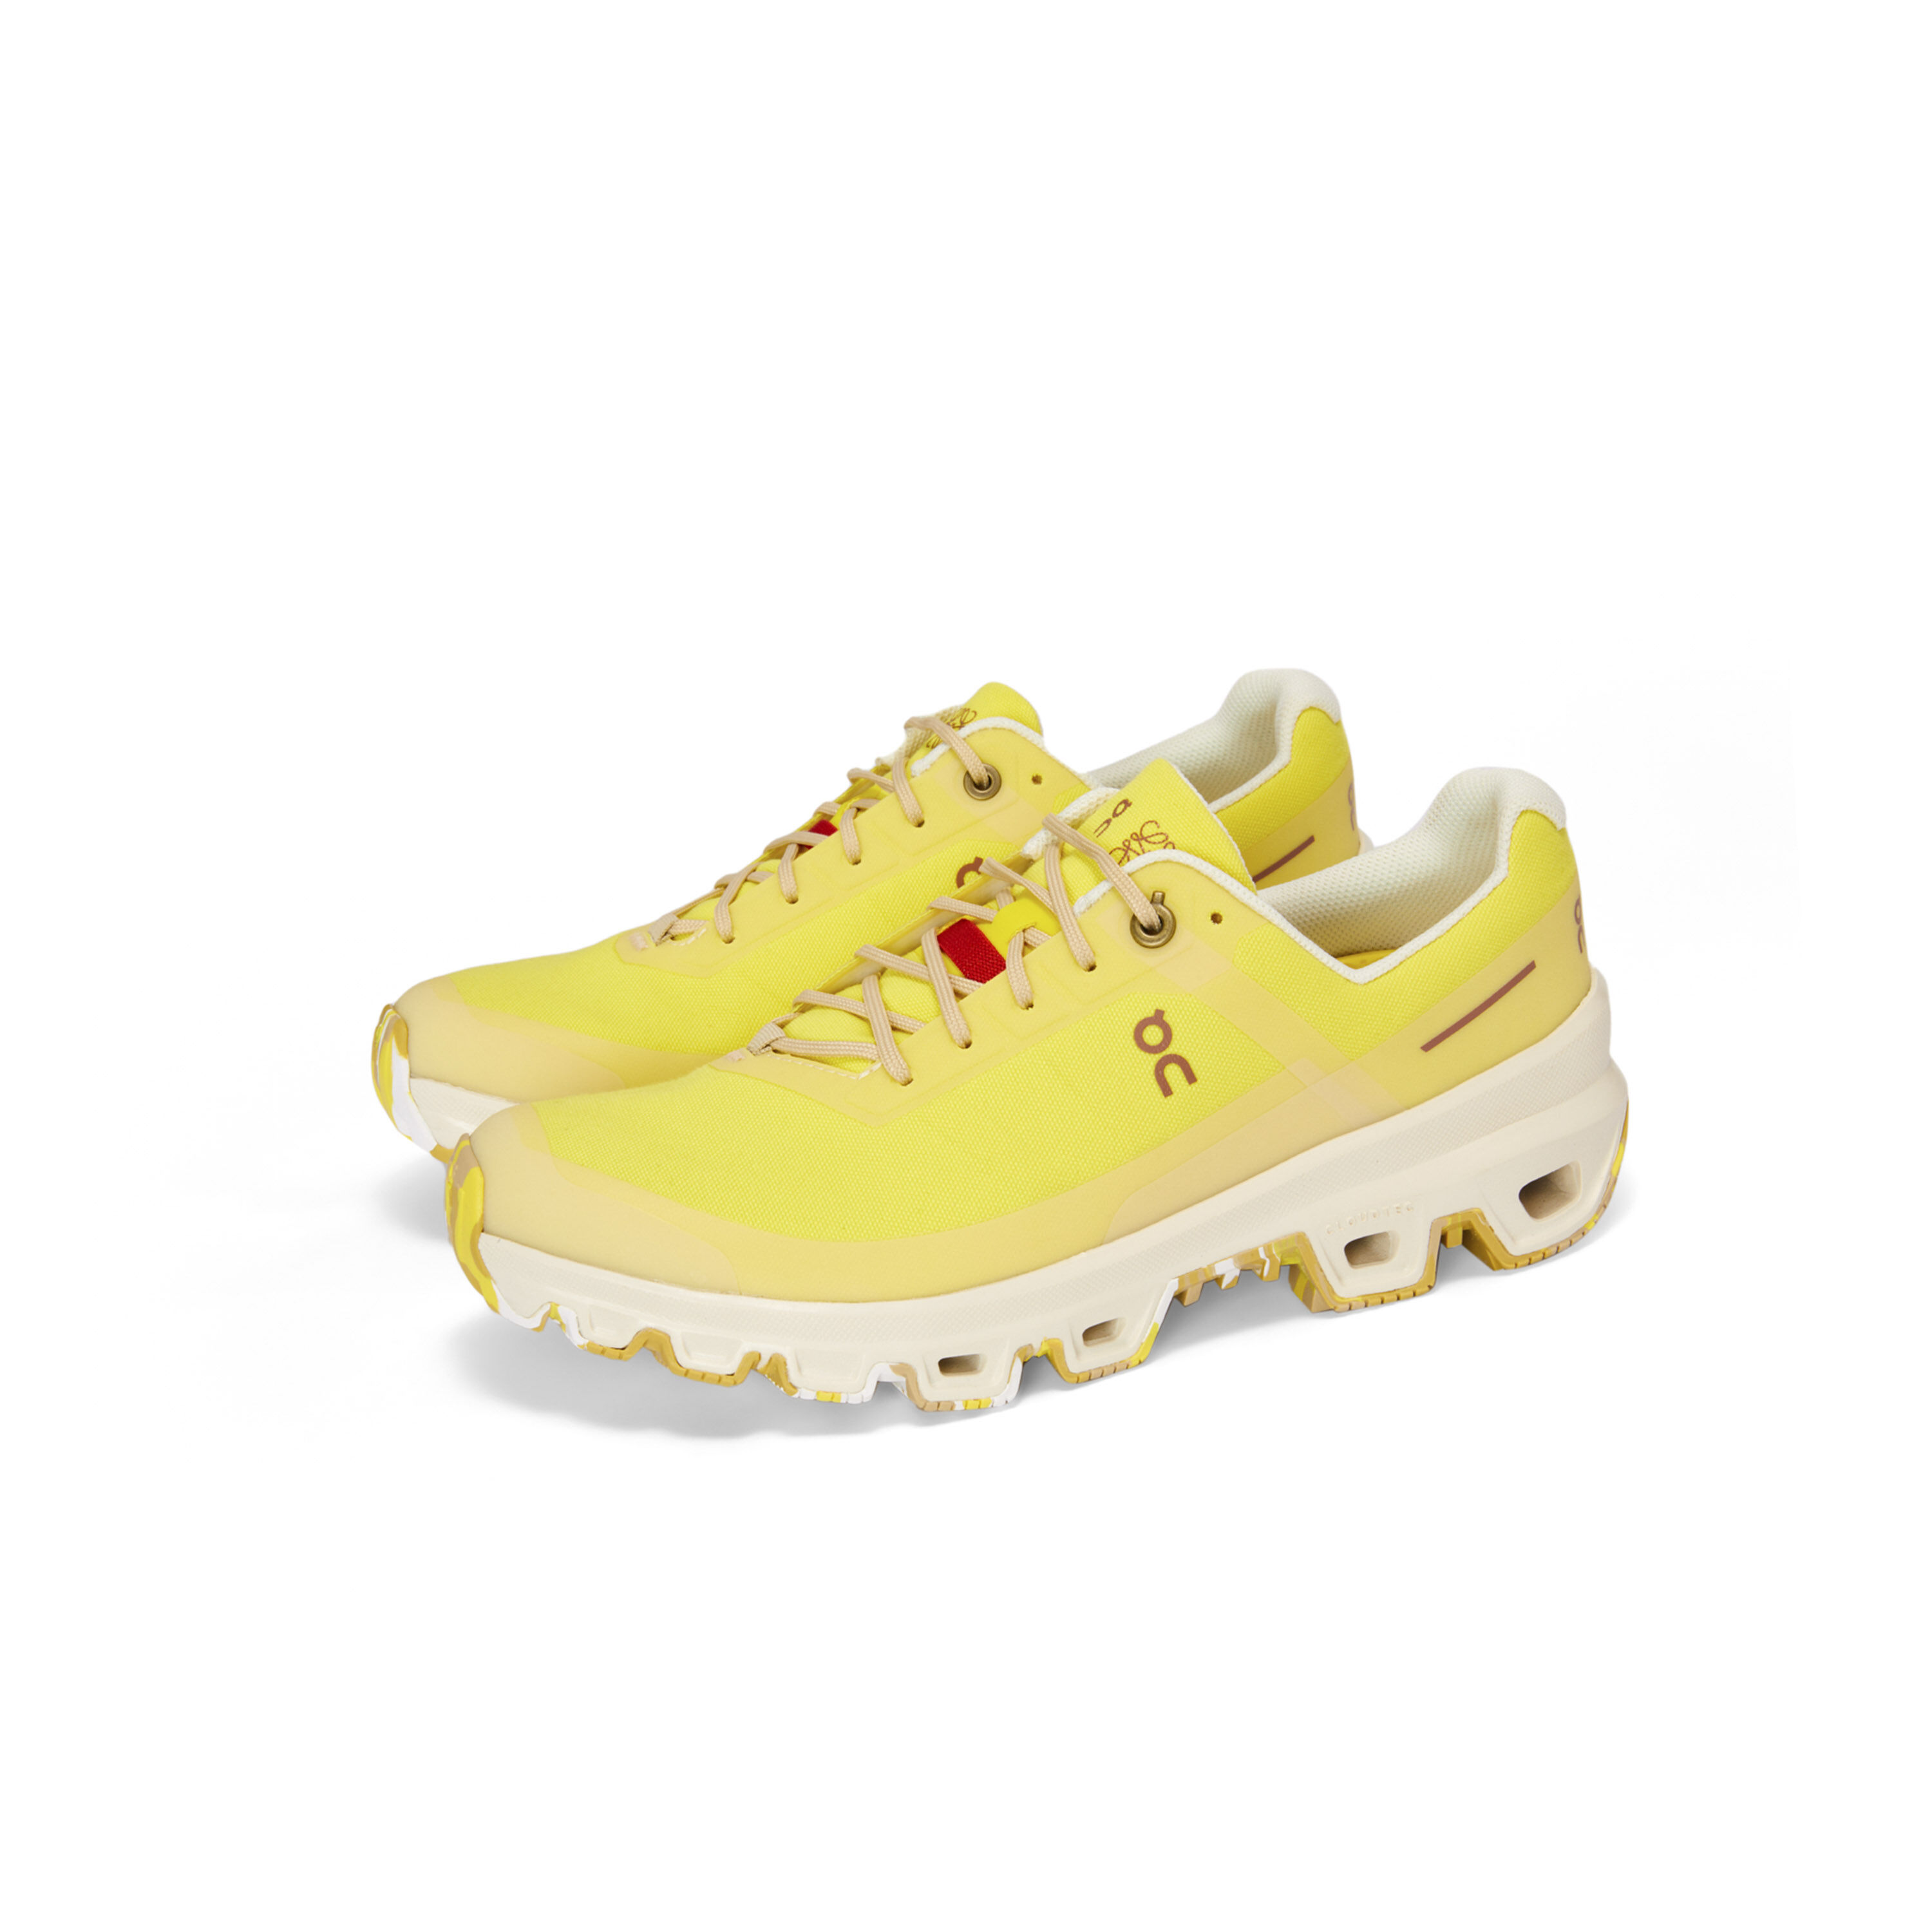 LOEWE x On running shoes collection